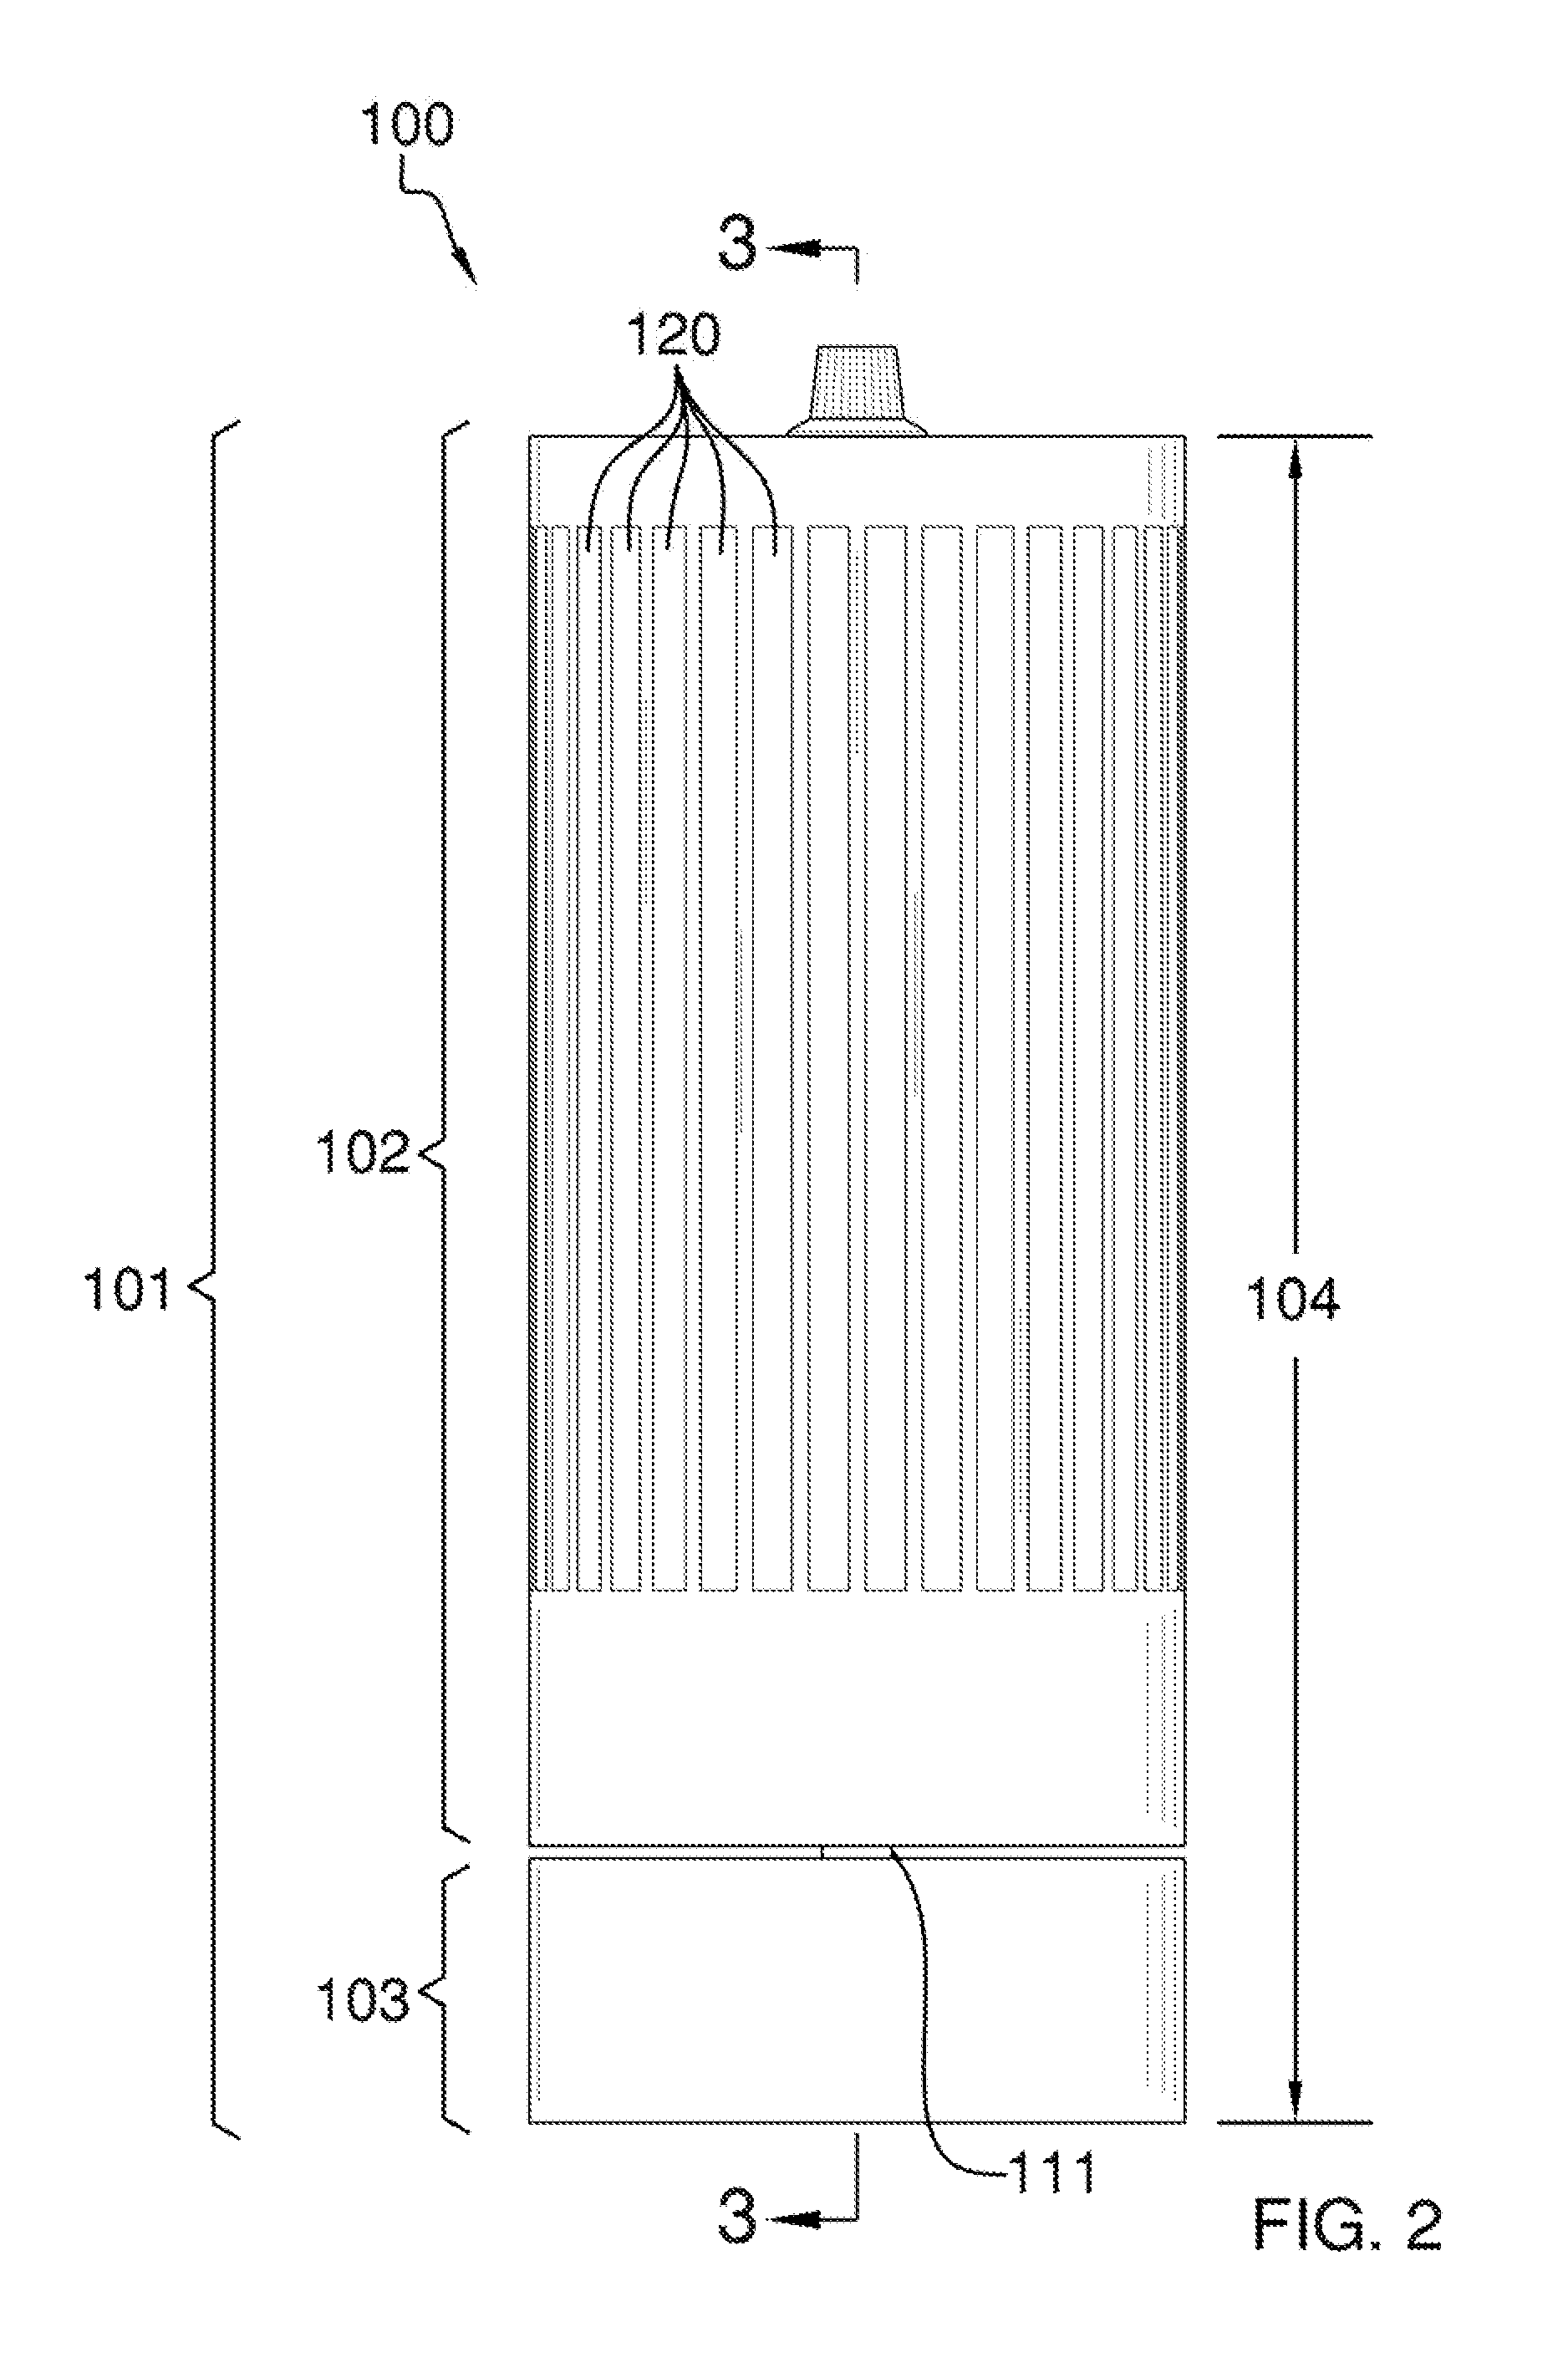 Fan assembly having multiple centrifugal fans in mechanical connection with a planetary gear system